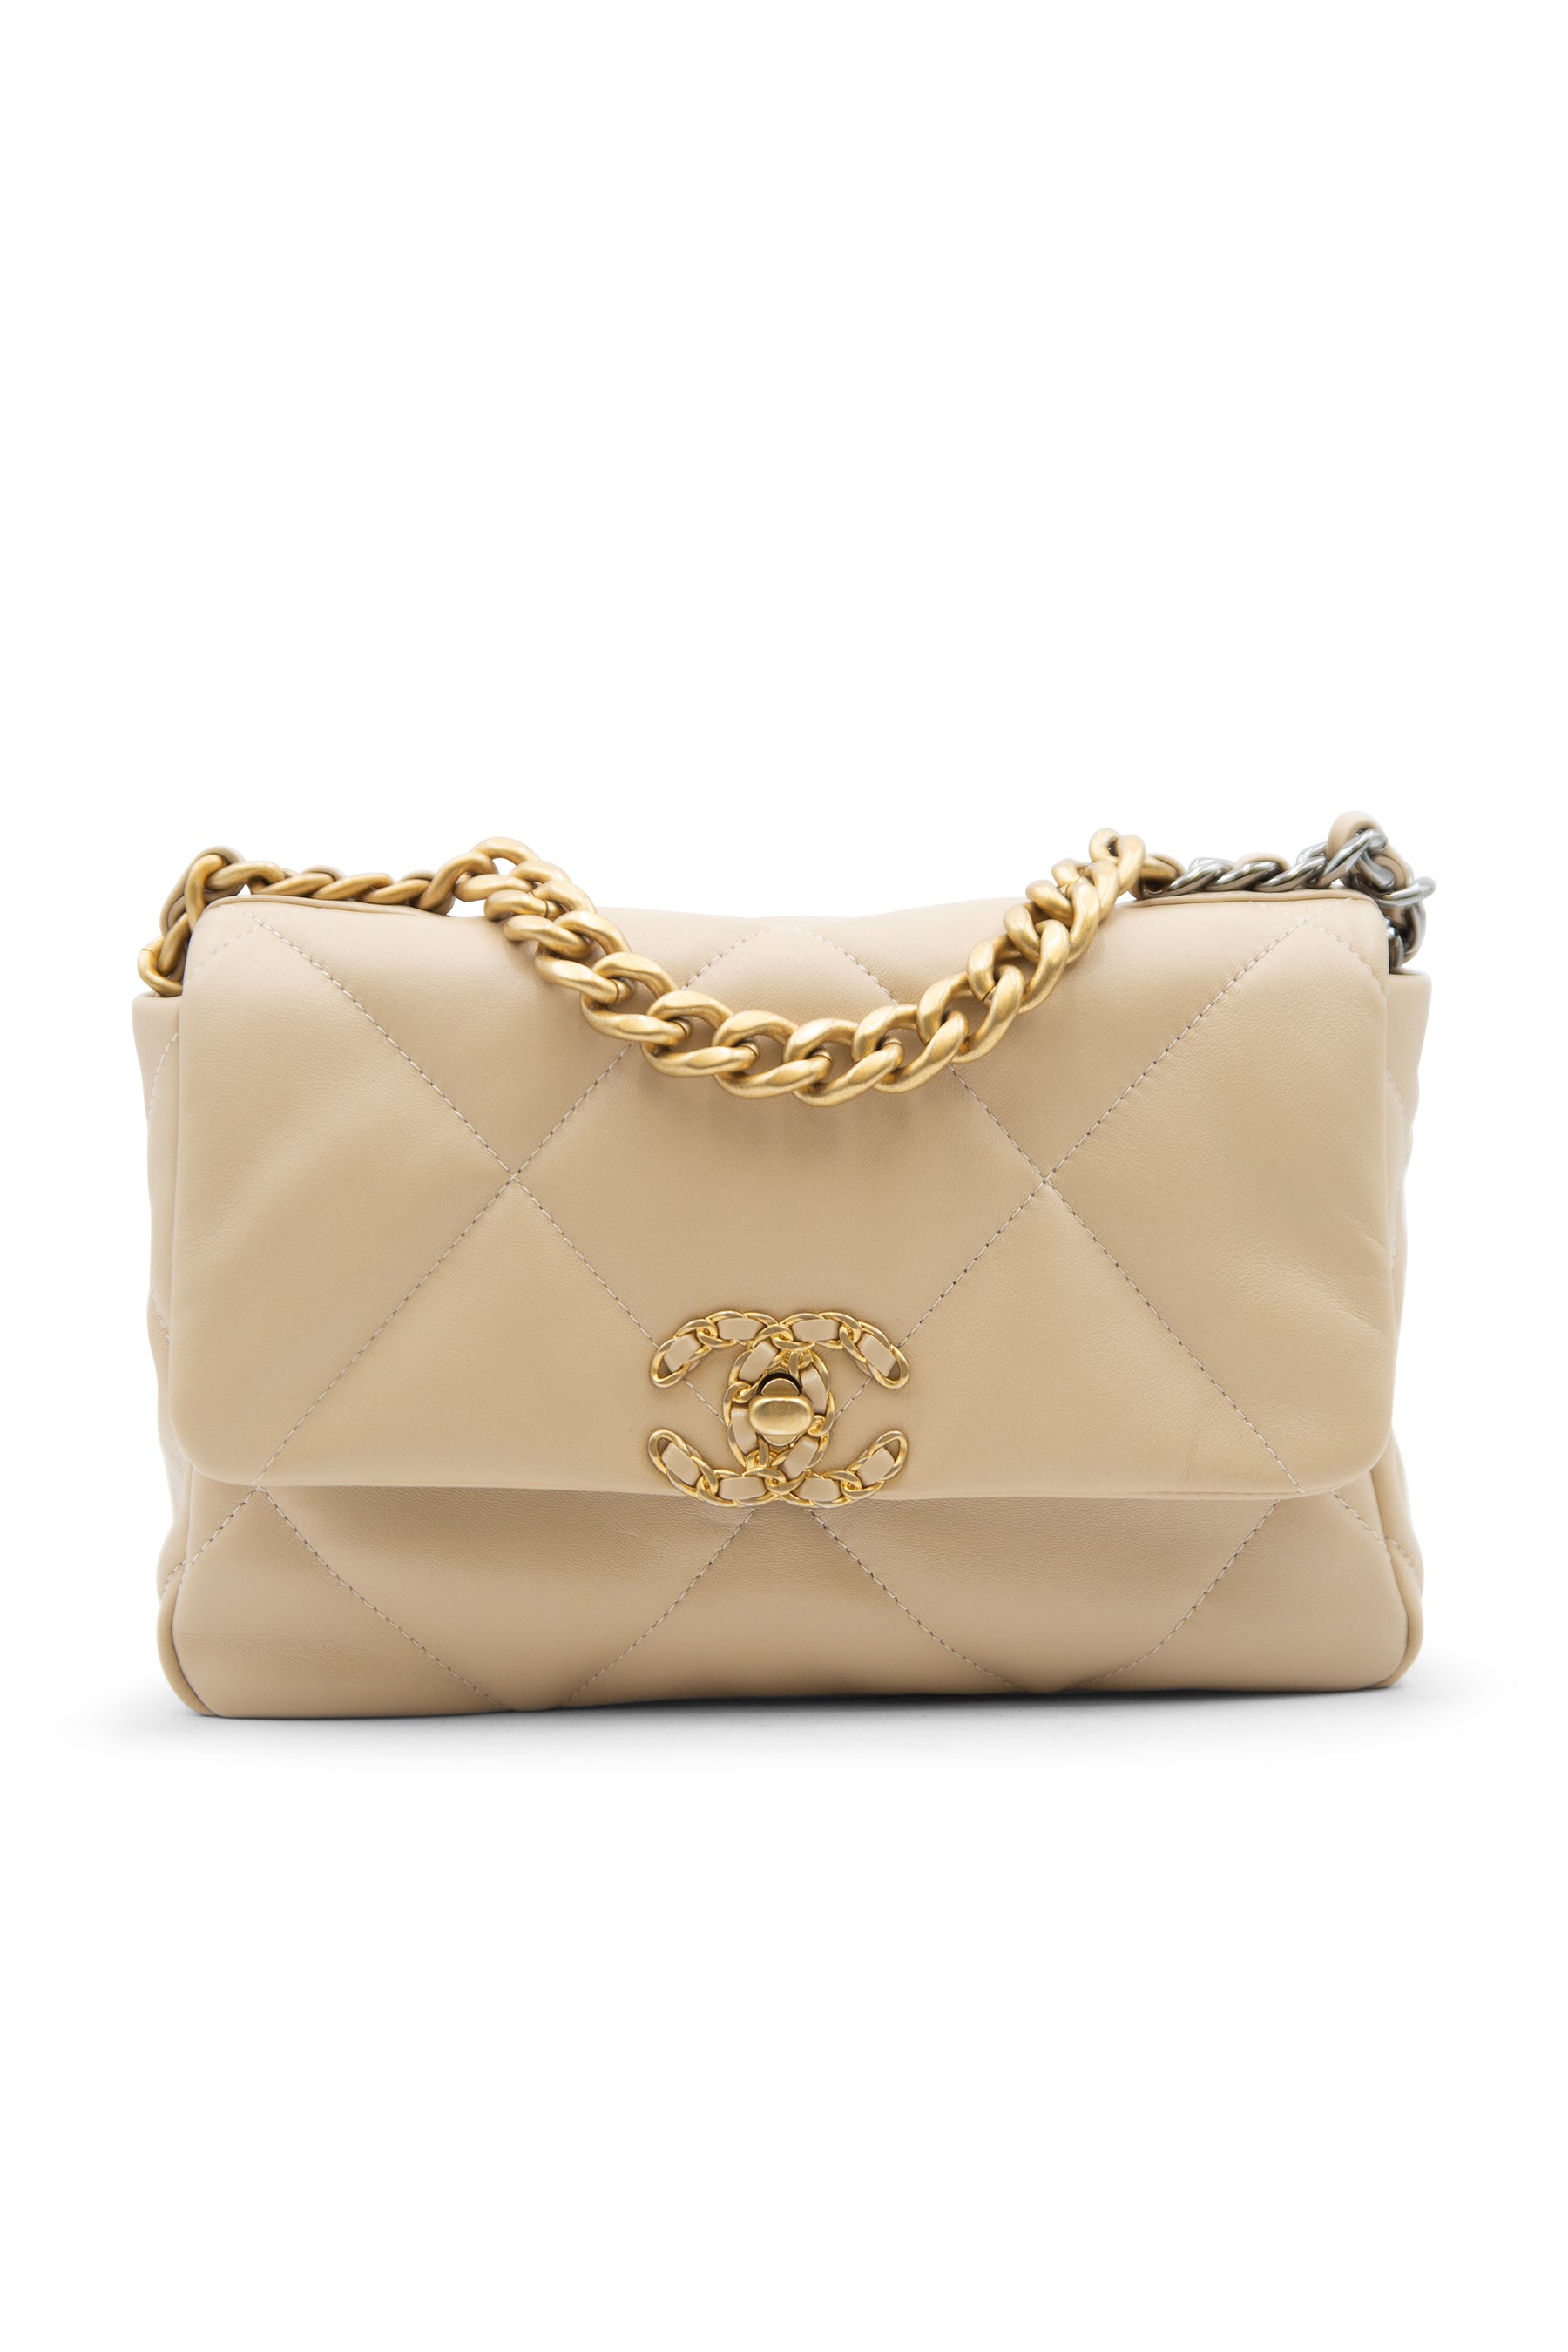 Chanel  Chanel 19 Flap Bag  Small  White  Bagista